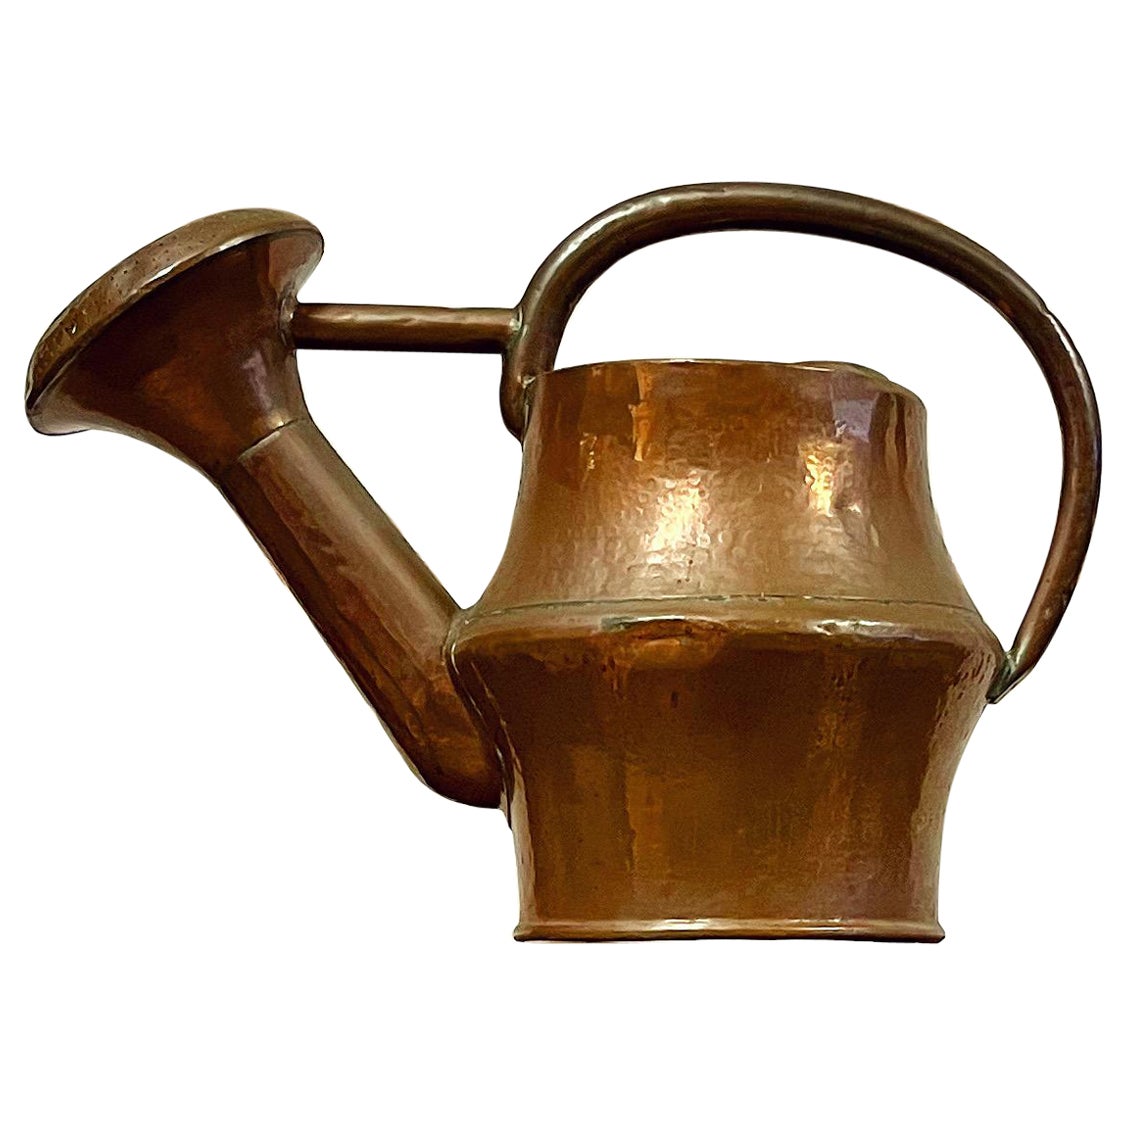 An Eighteenth Century Copper Watering Can